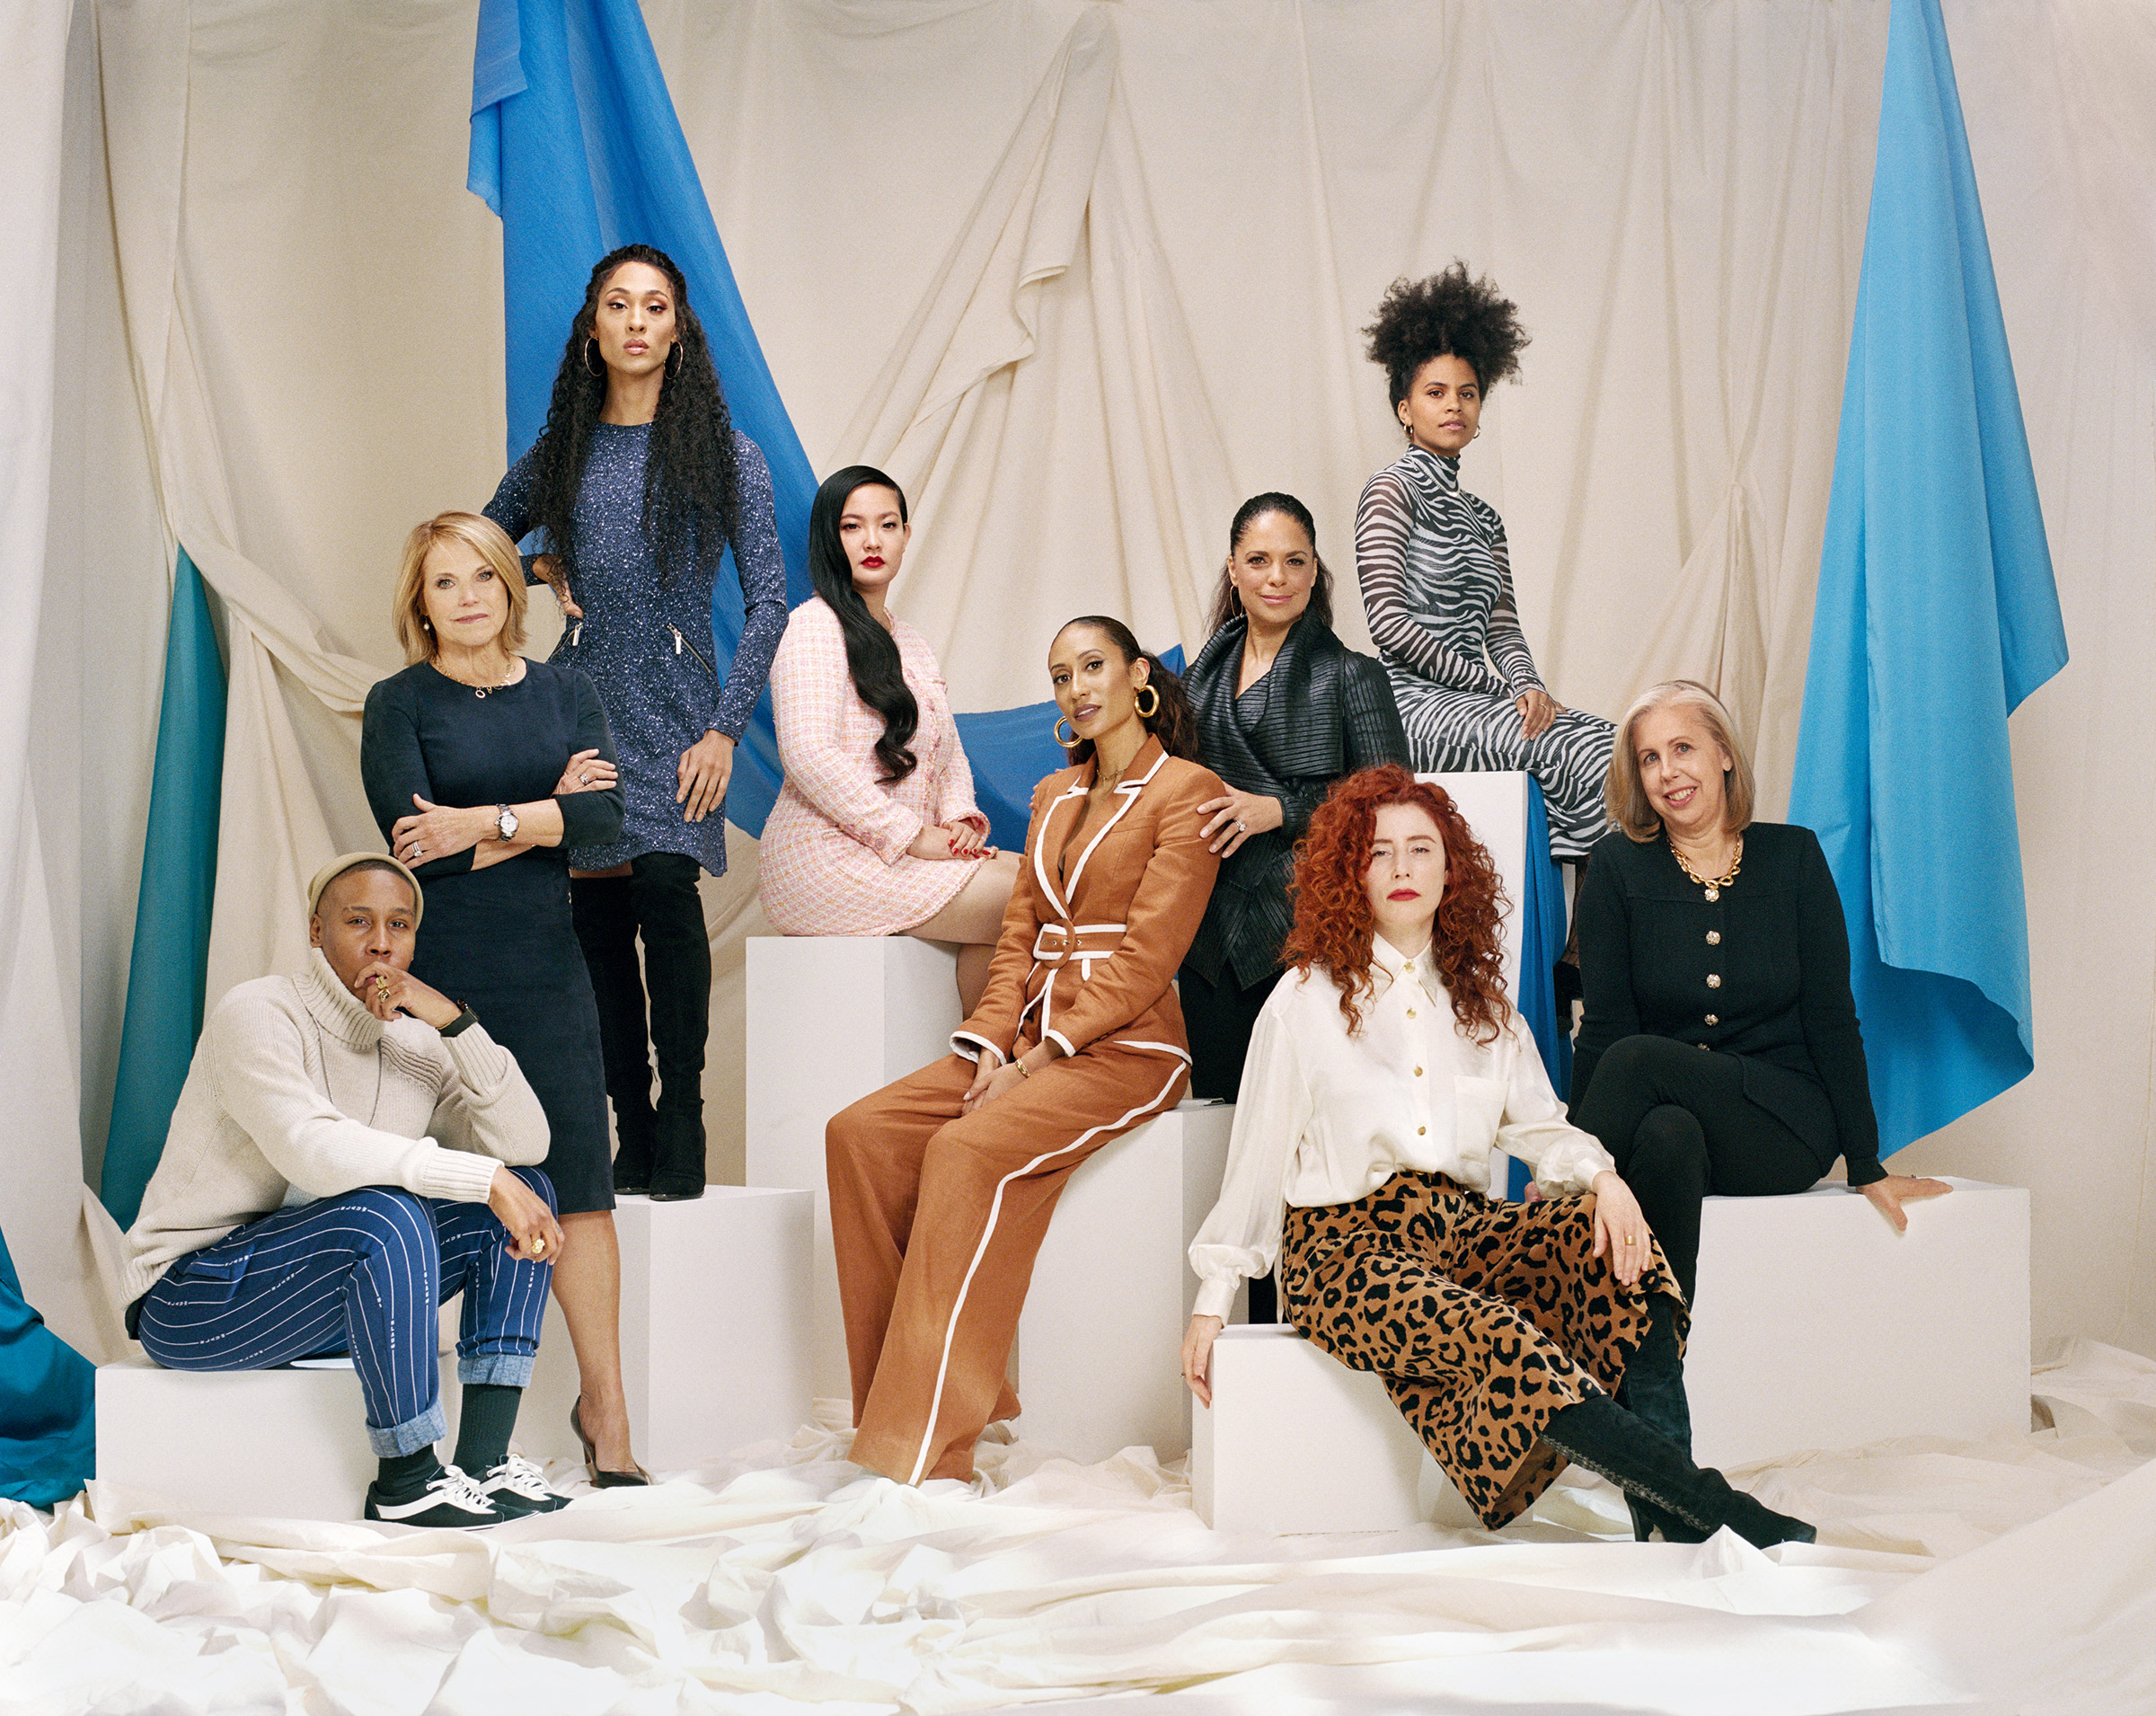 From left: Committee members Lena Waithe, Katie Couric, Mj Rodriguez, Amanda Nguyen, Elaine Welteroth, Soledad O’Brien, Zazie Beetz, Alma Har’el and Nancy Gibbs, photographed on Feb. 16 in New York City (Camila Falquez for TIME)